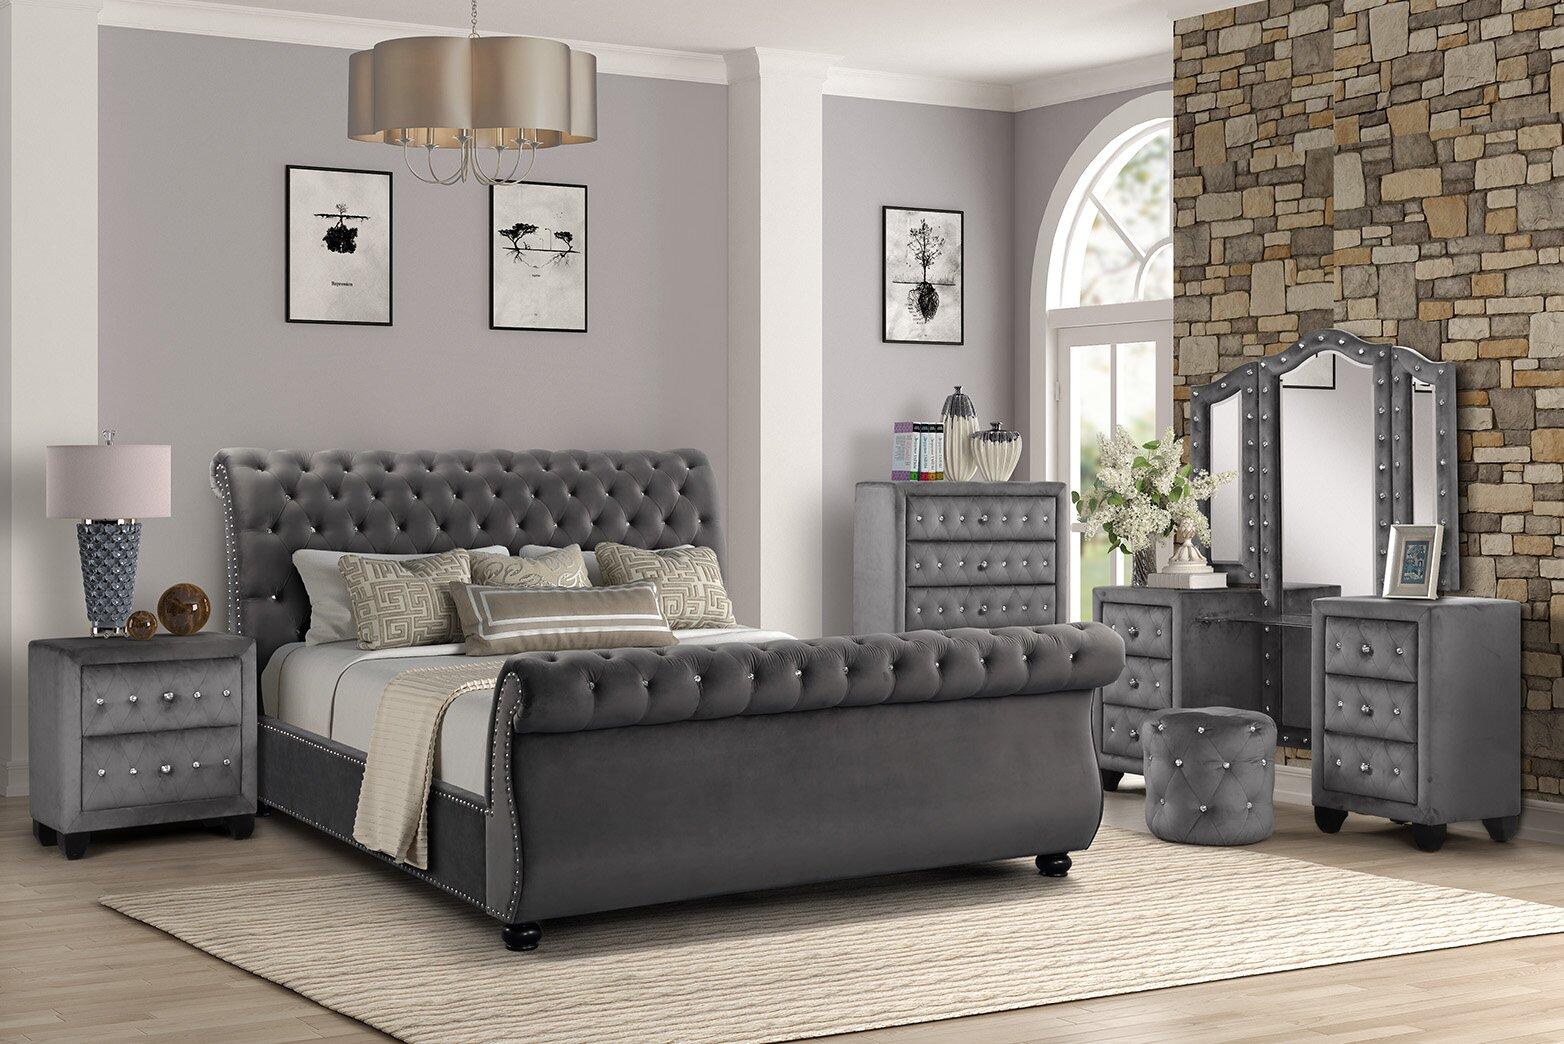 

    
Gray Velvet Queen Bed Set 4Pcs w/VANITY KENDALL Galaxy Home Contemporary
